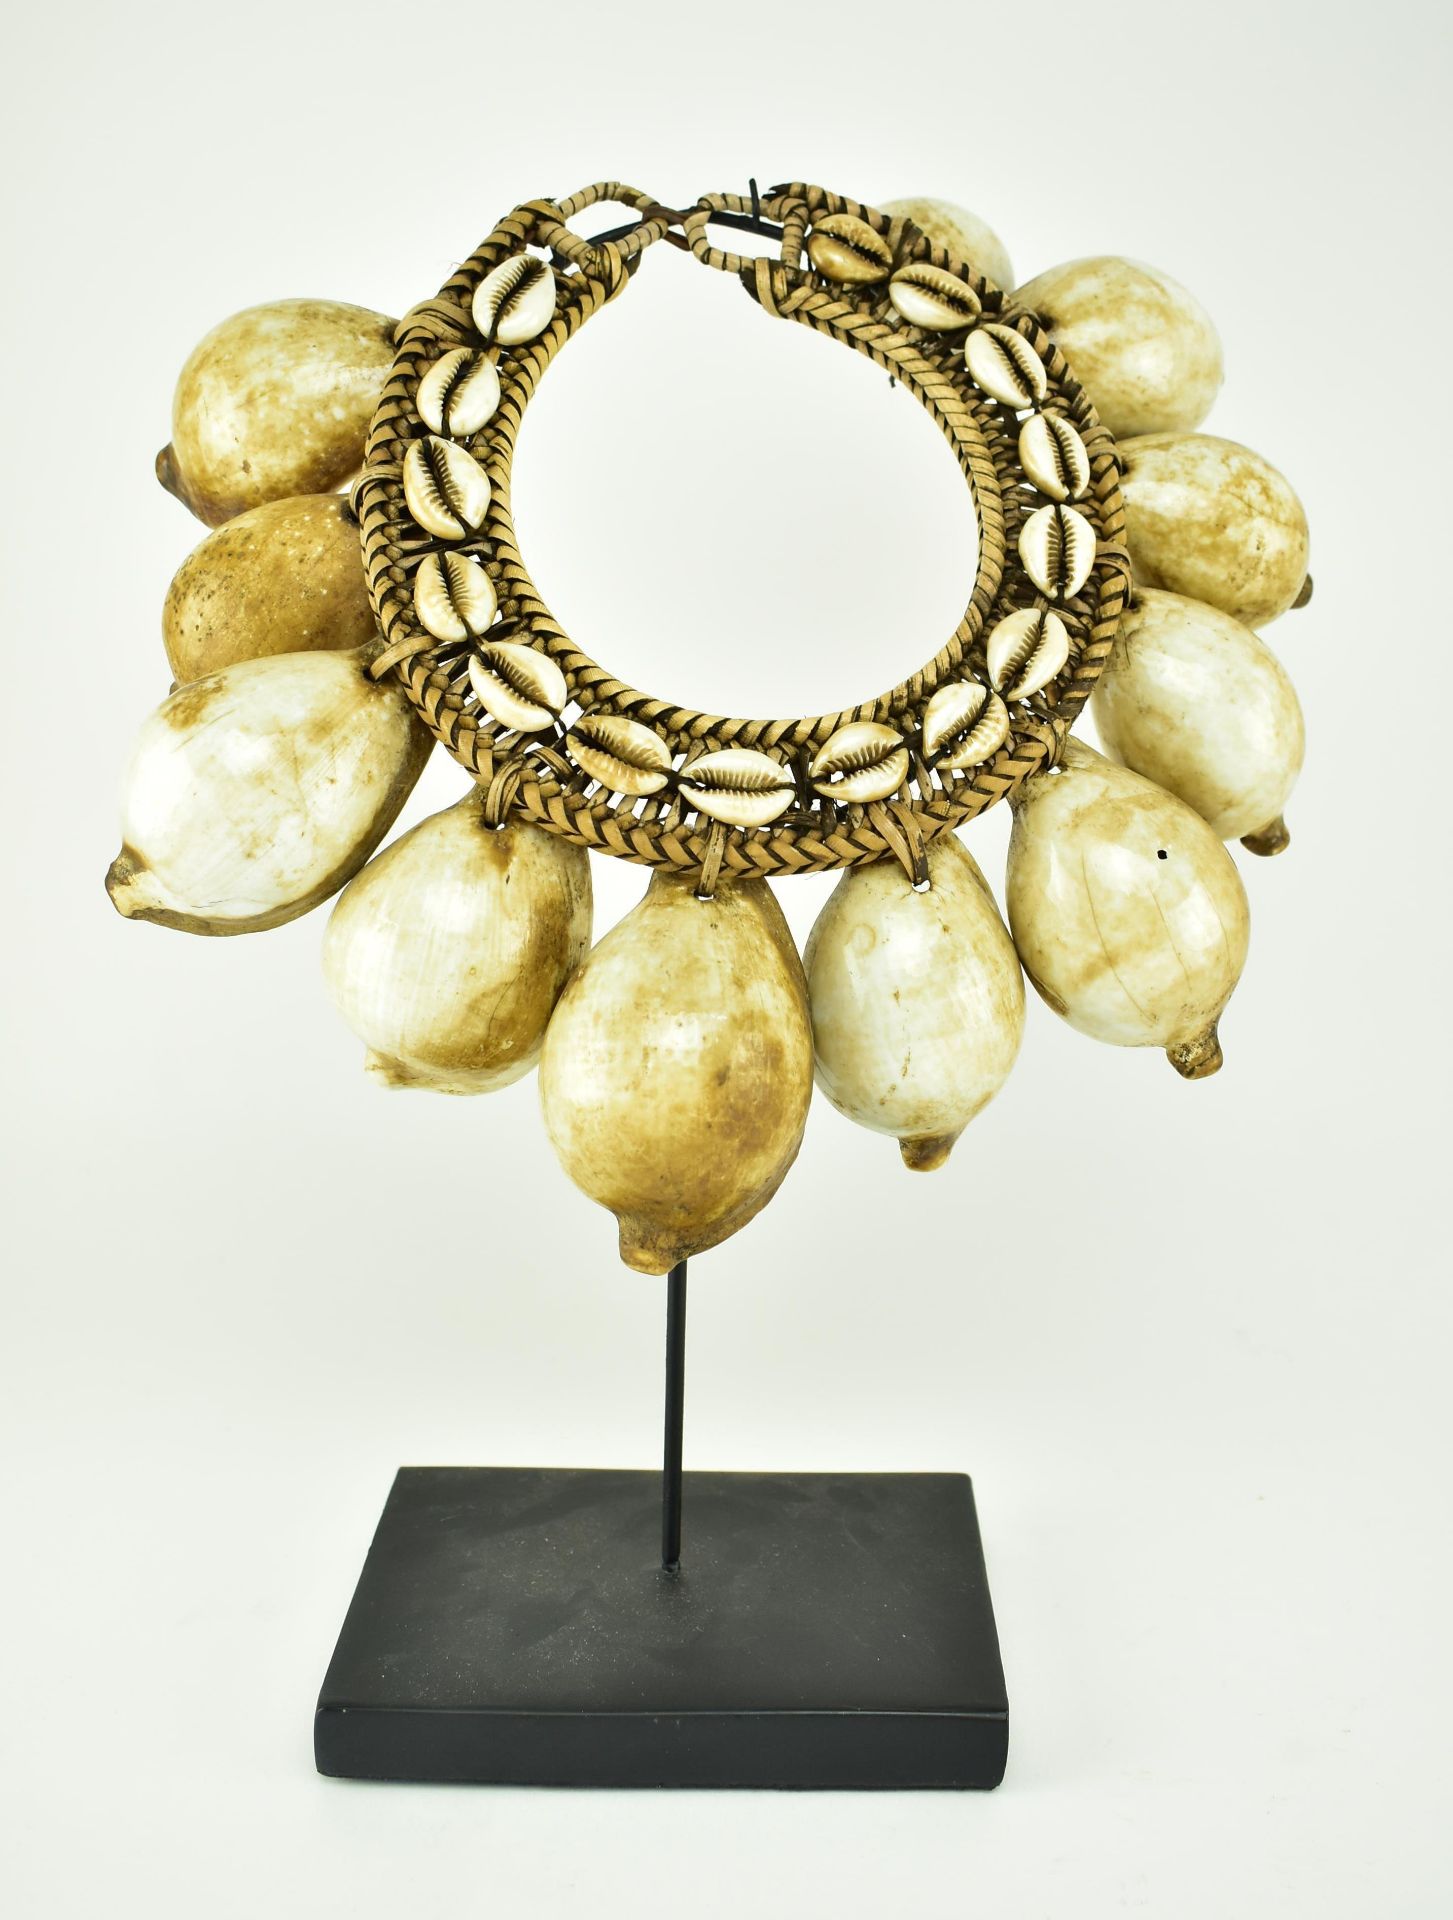 TWO ROCHE BOBOIS NATURAL SHELL NECKLACE ON STAND - Image 3 of 6